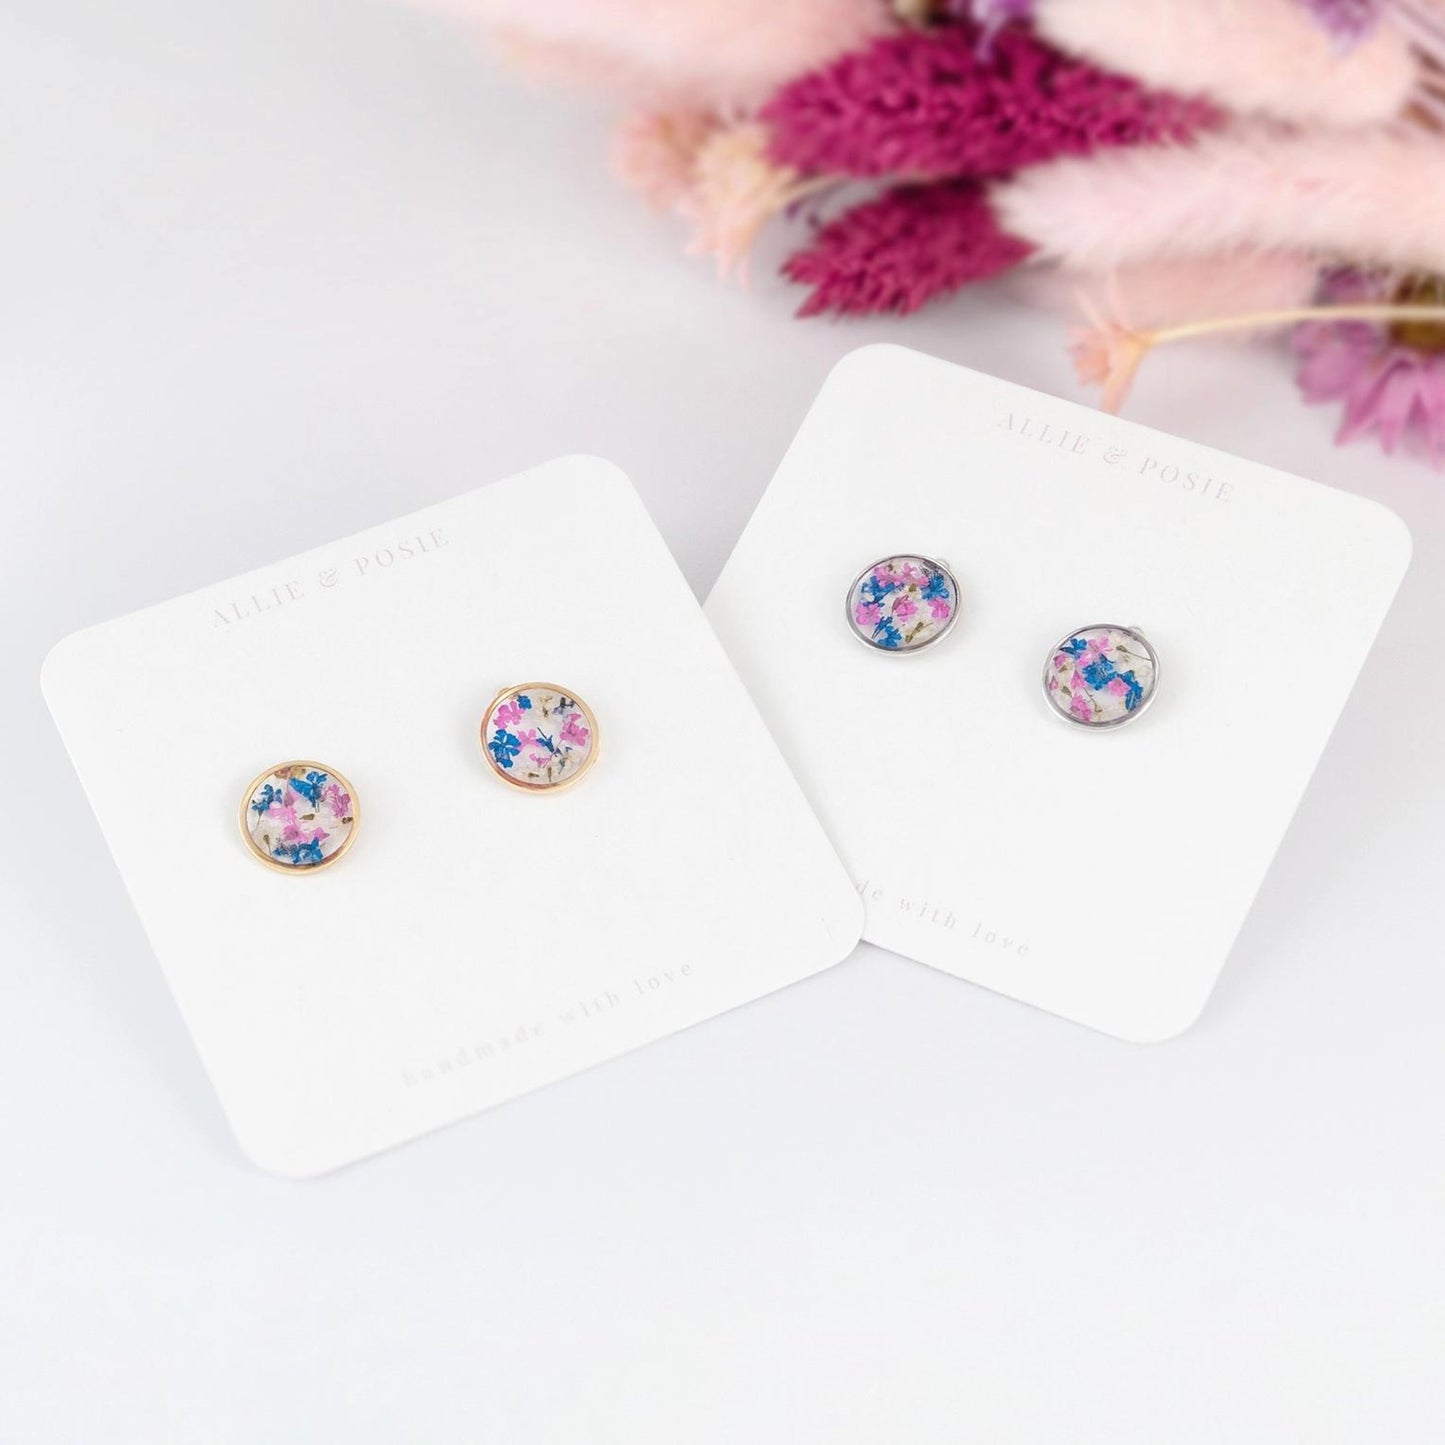 Real Flower Studs With Colourful Petals: Gold plated - The Little Jewellery Company